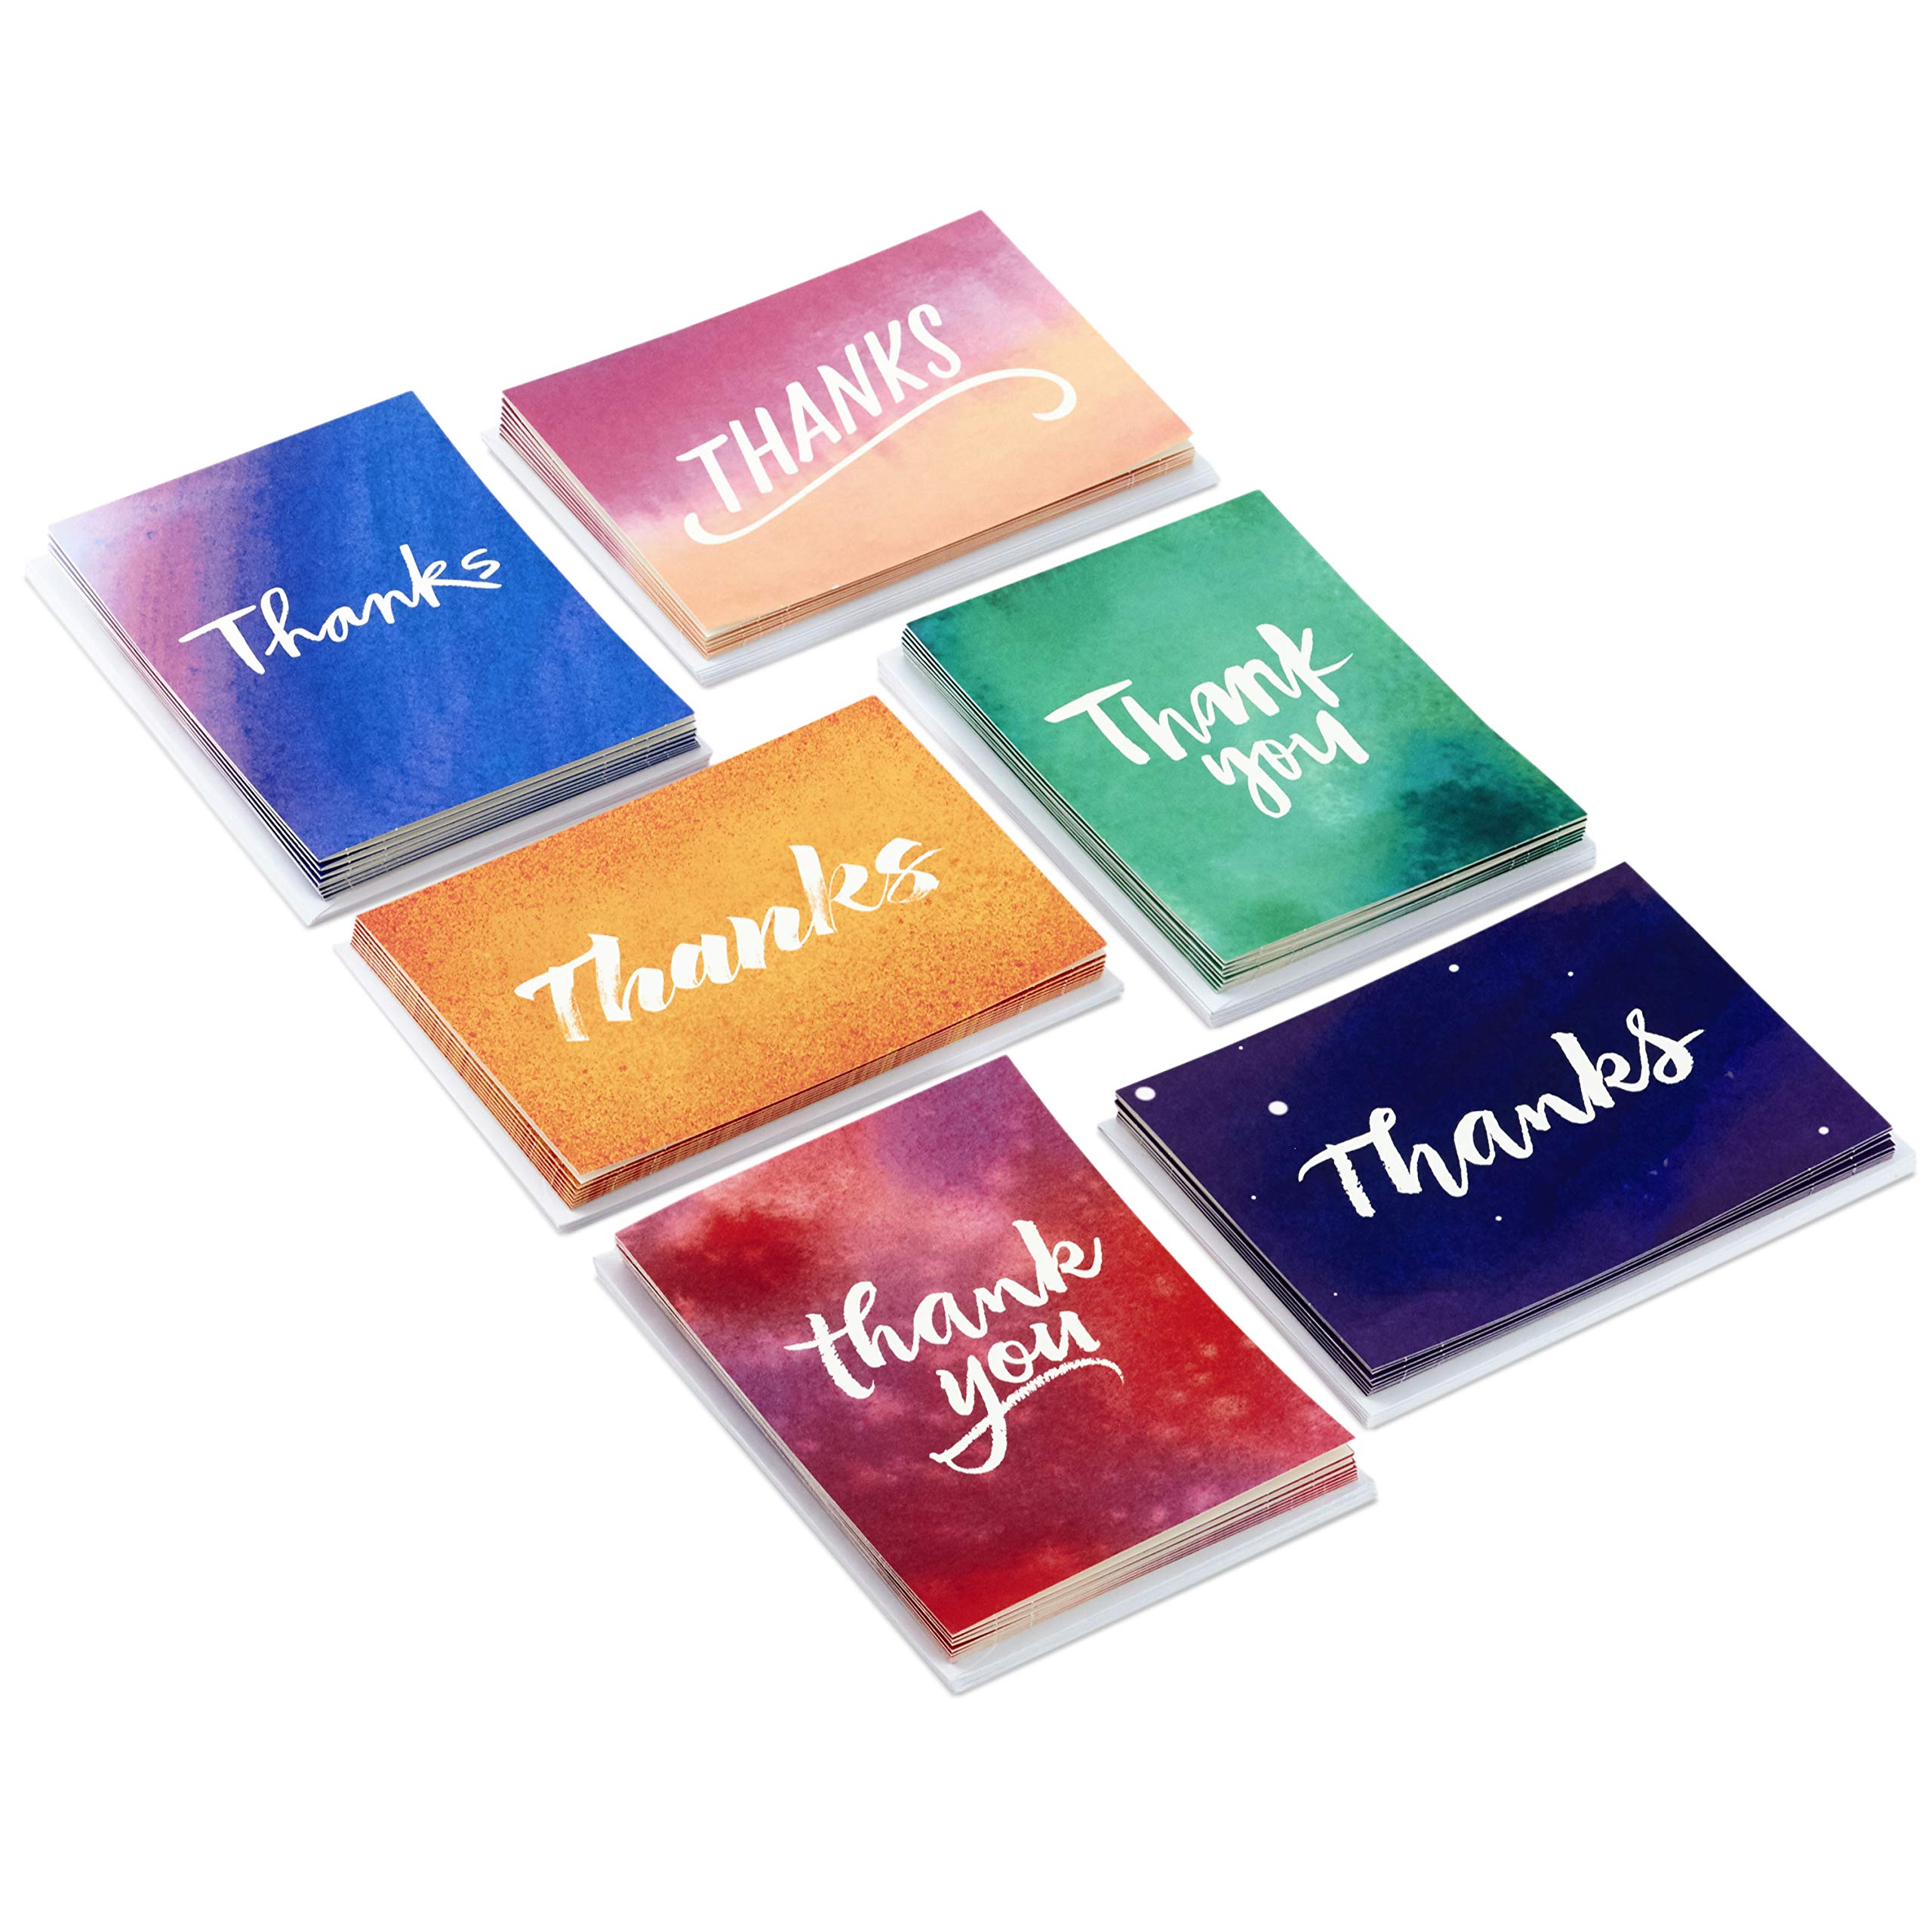 Hallmark Thank You Cards Assortment, Watercolor Thanks (48 Cards with Envelopes for Baby Showers, Wedding, Bridal Showers, All Occasion)